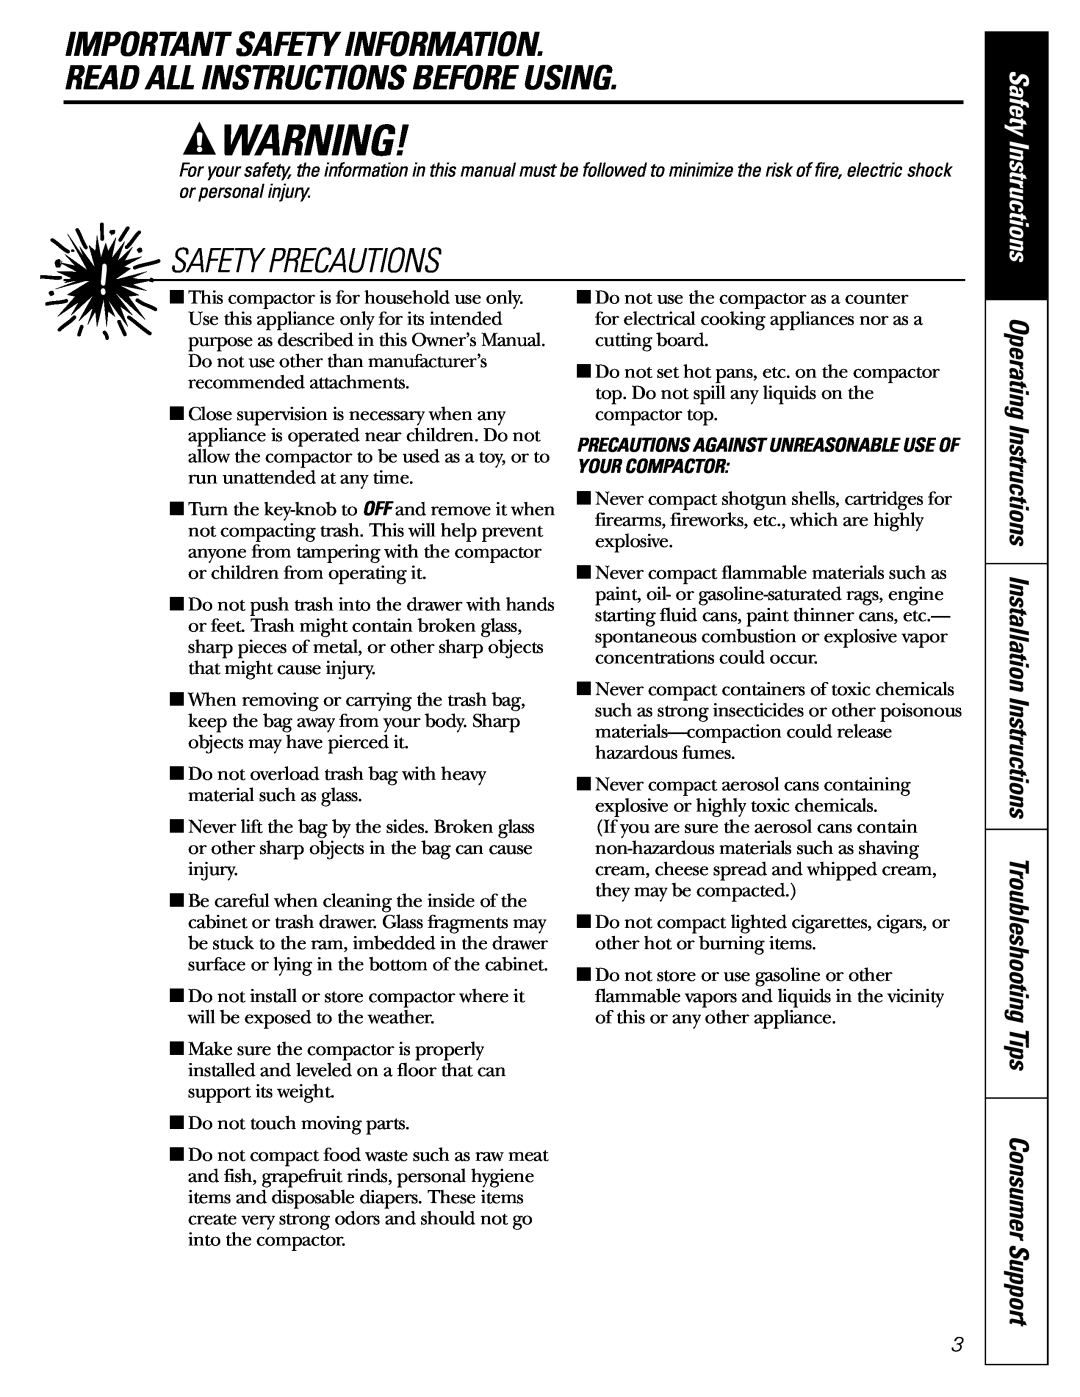 GE GCG1520 Important Safety Information Read All Instructions Before Using, Safety Precautions, Safety Instructions 